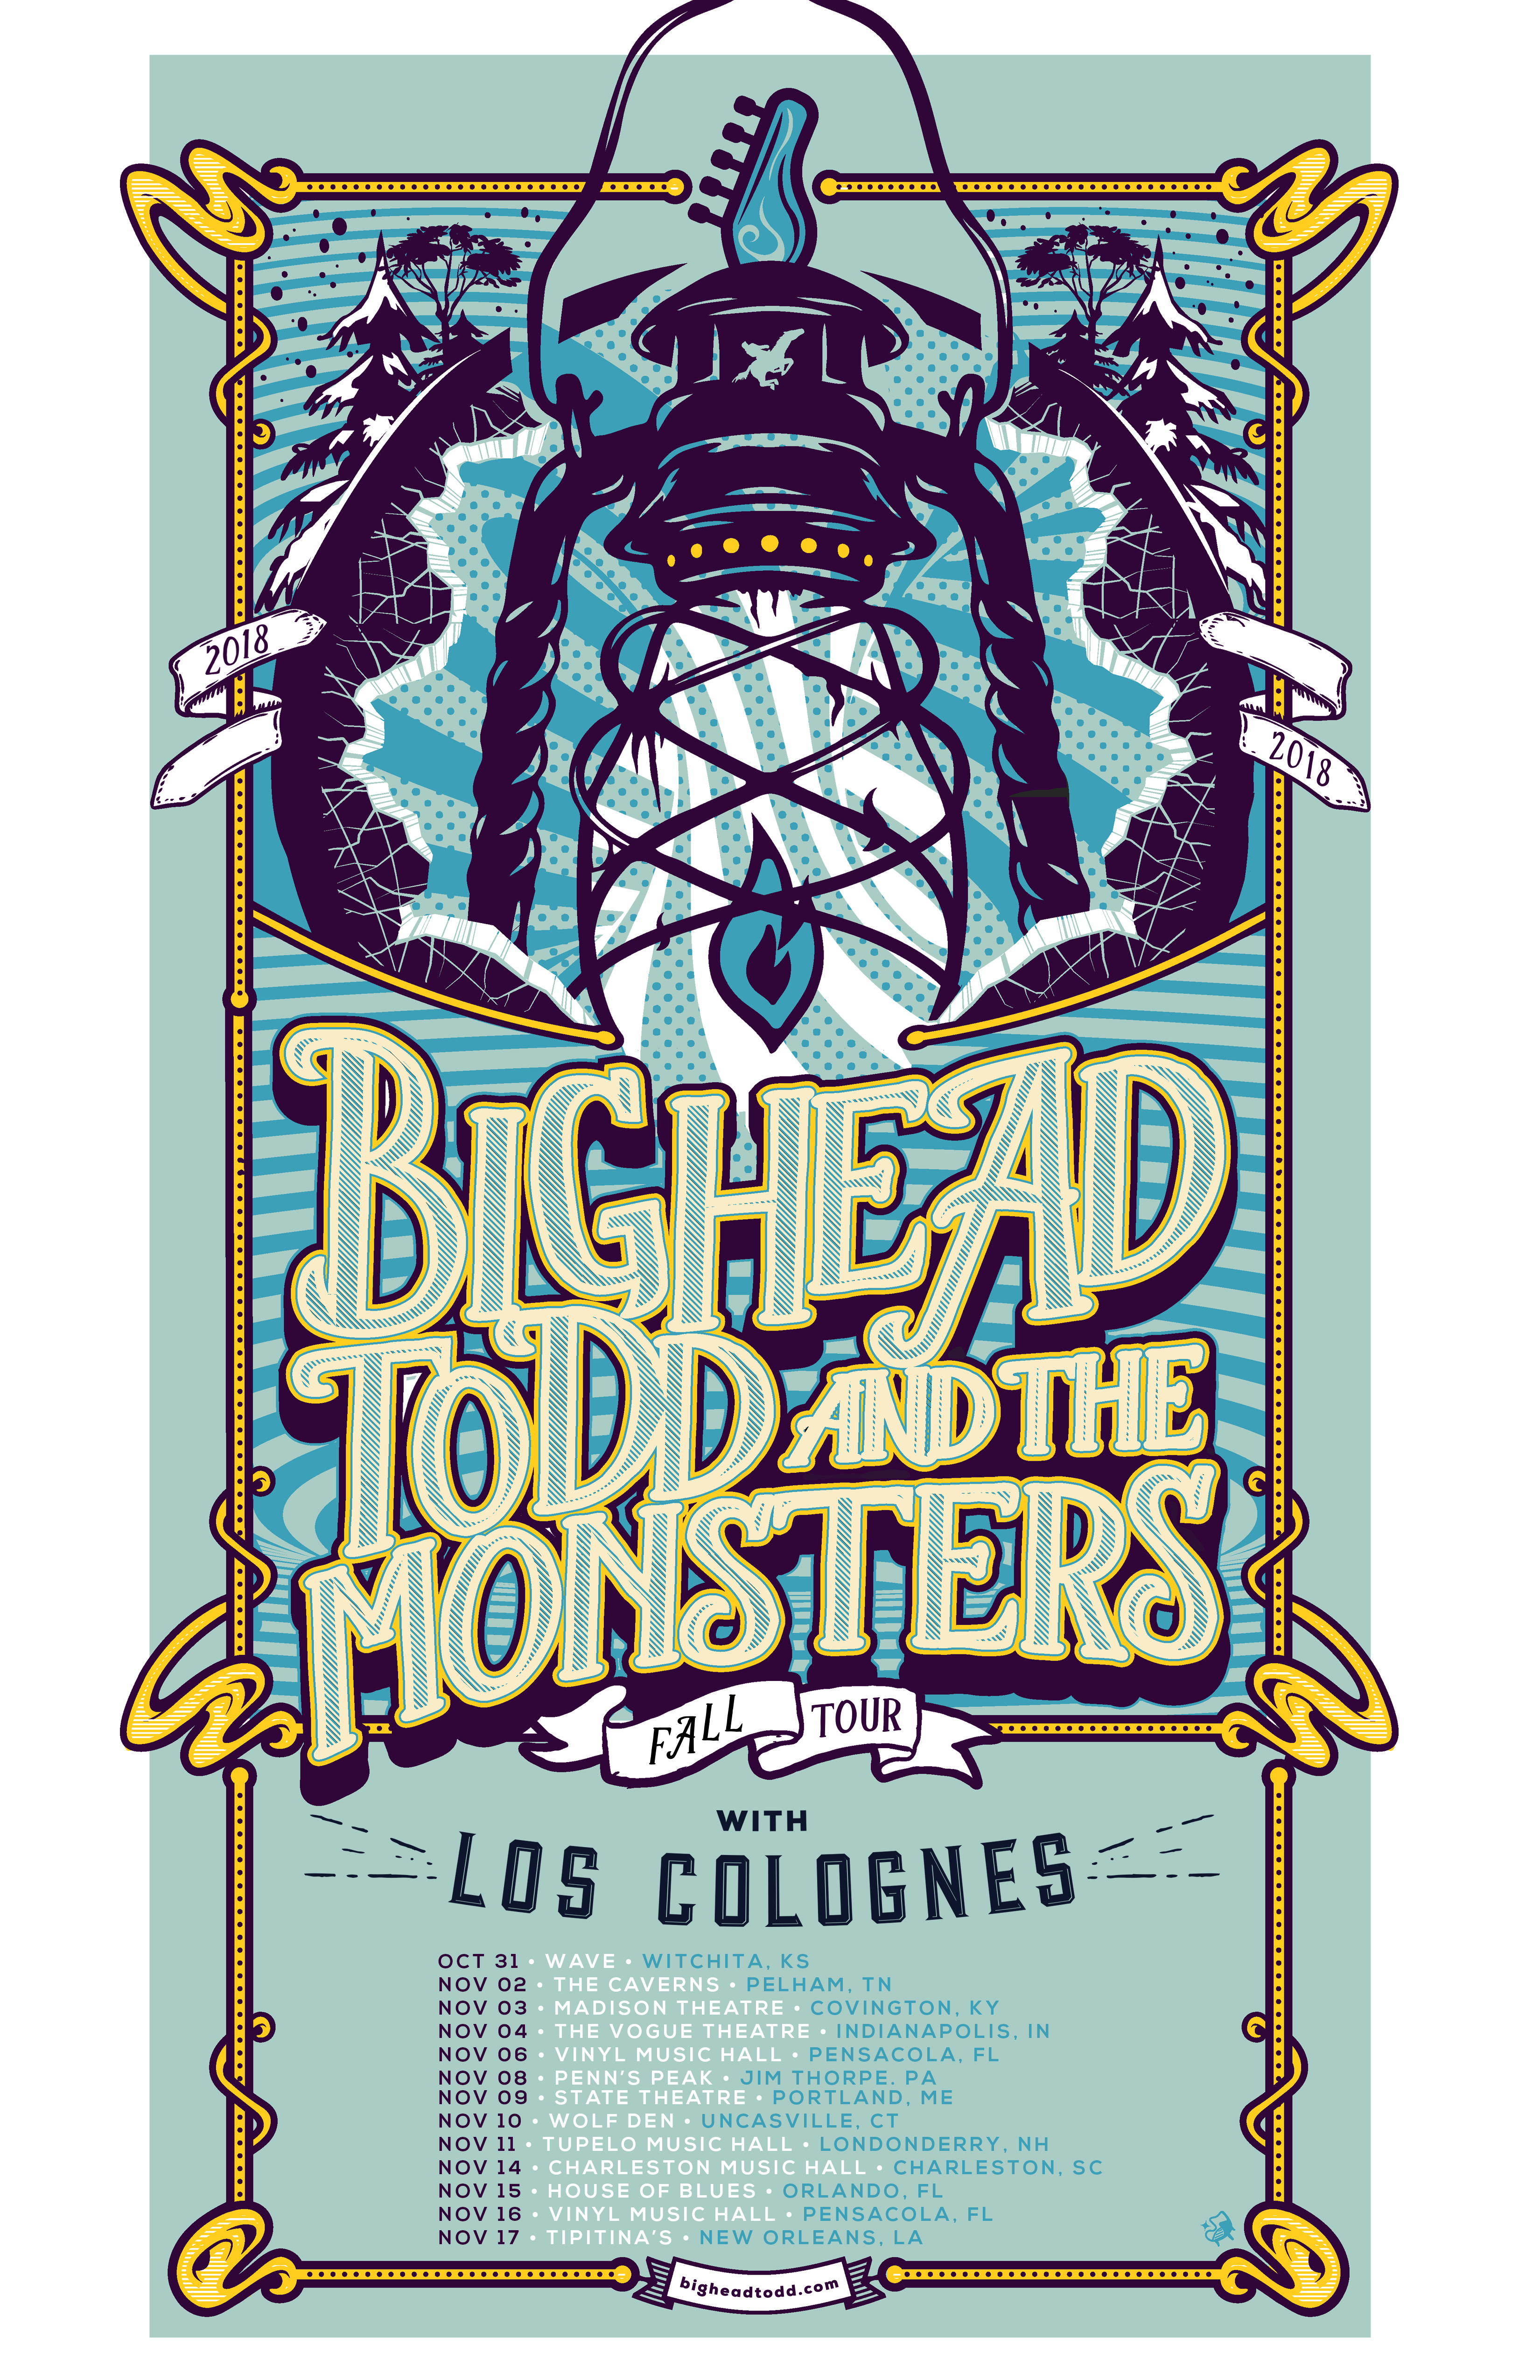 Big Head Todd announces their November fall tour with Los Colognes! Tickets on sale Friday 8/10 at 10am (local). 